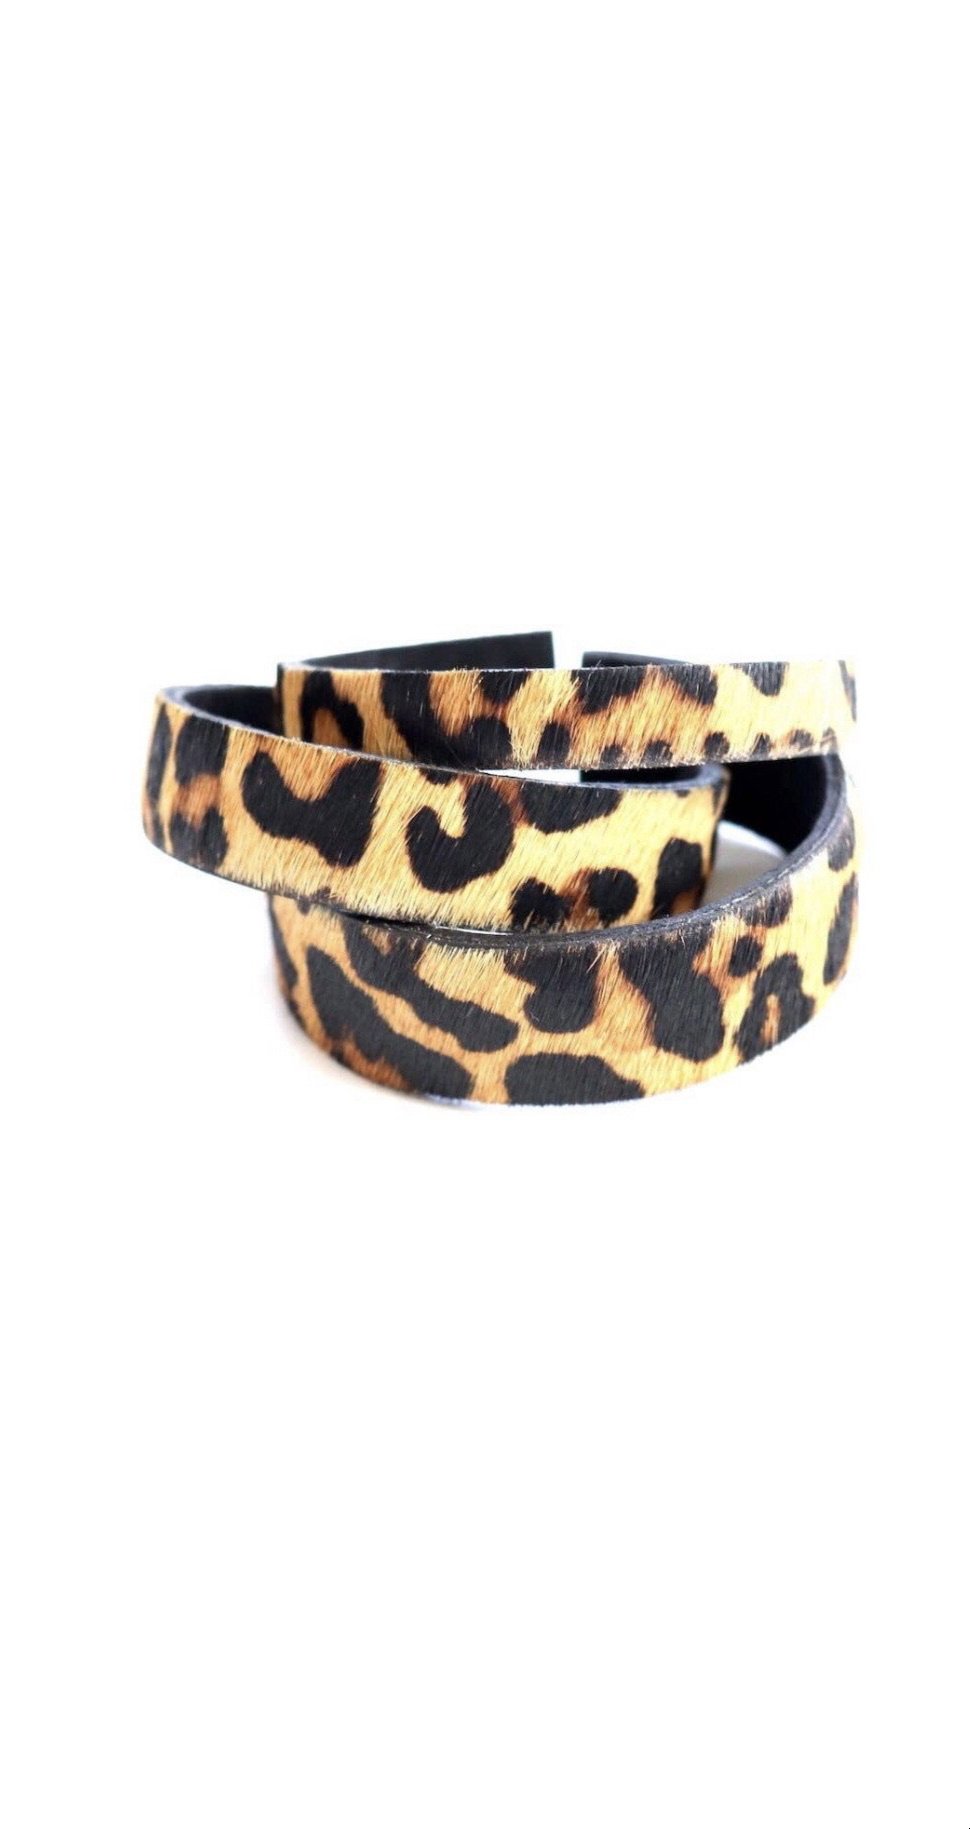 Animal Print Cuff Bracelet Set - Corinne Boutique Family Owned and Operated USA